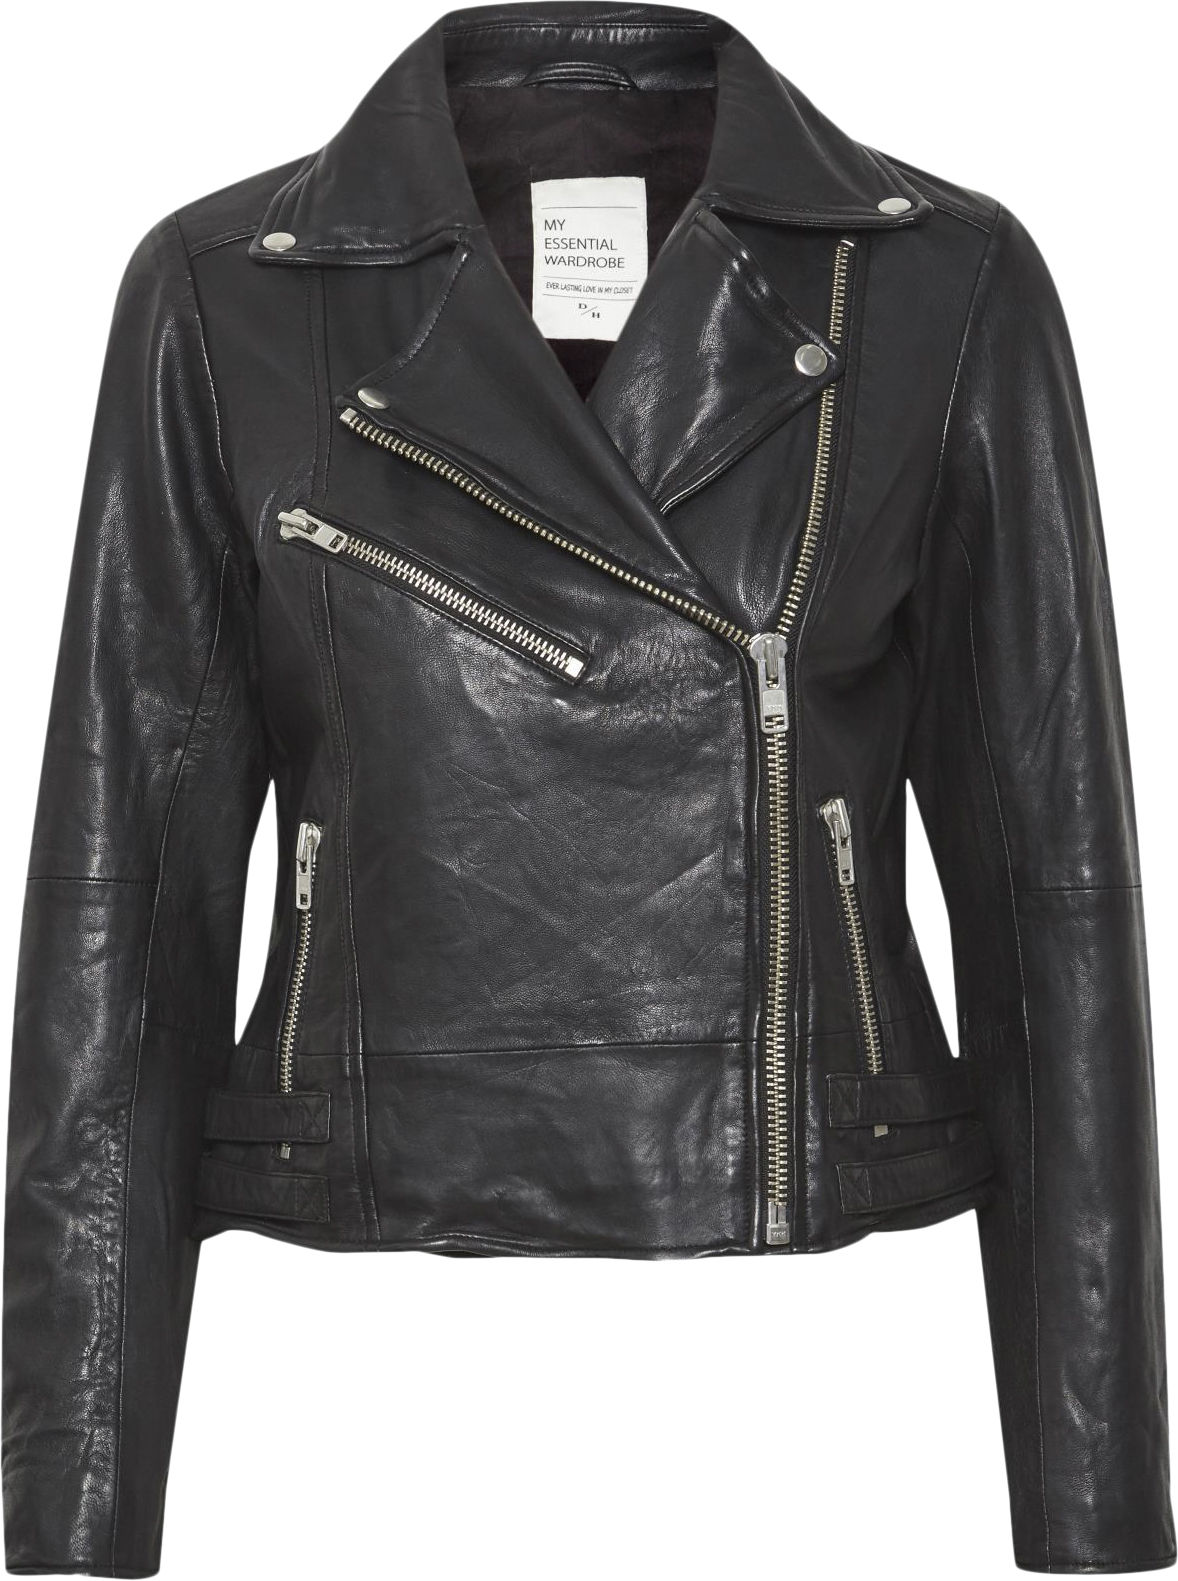 02 THE Leather Jacket